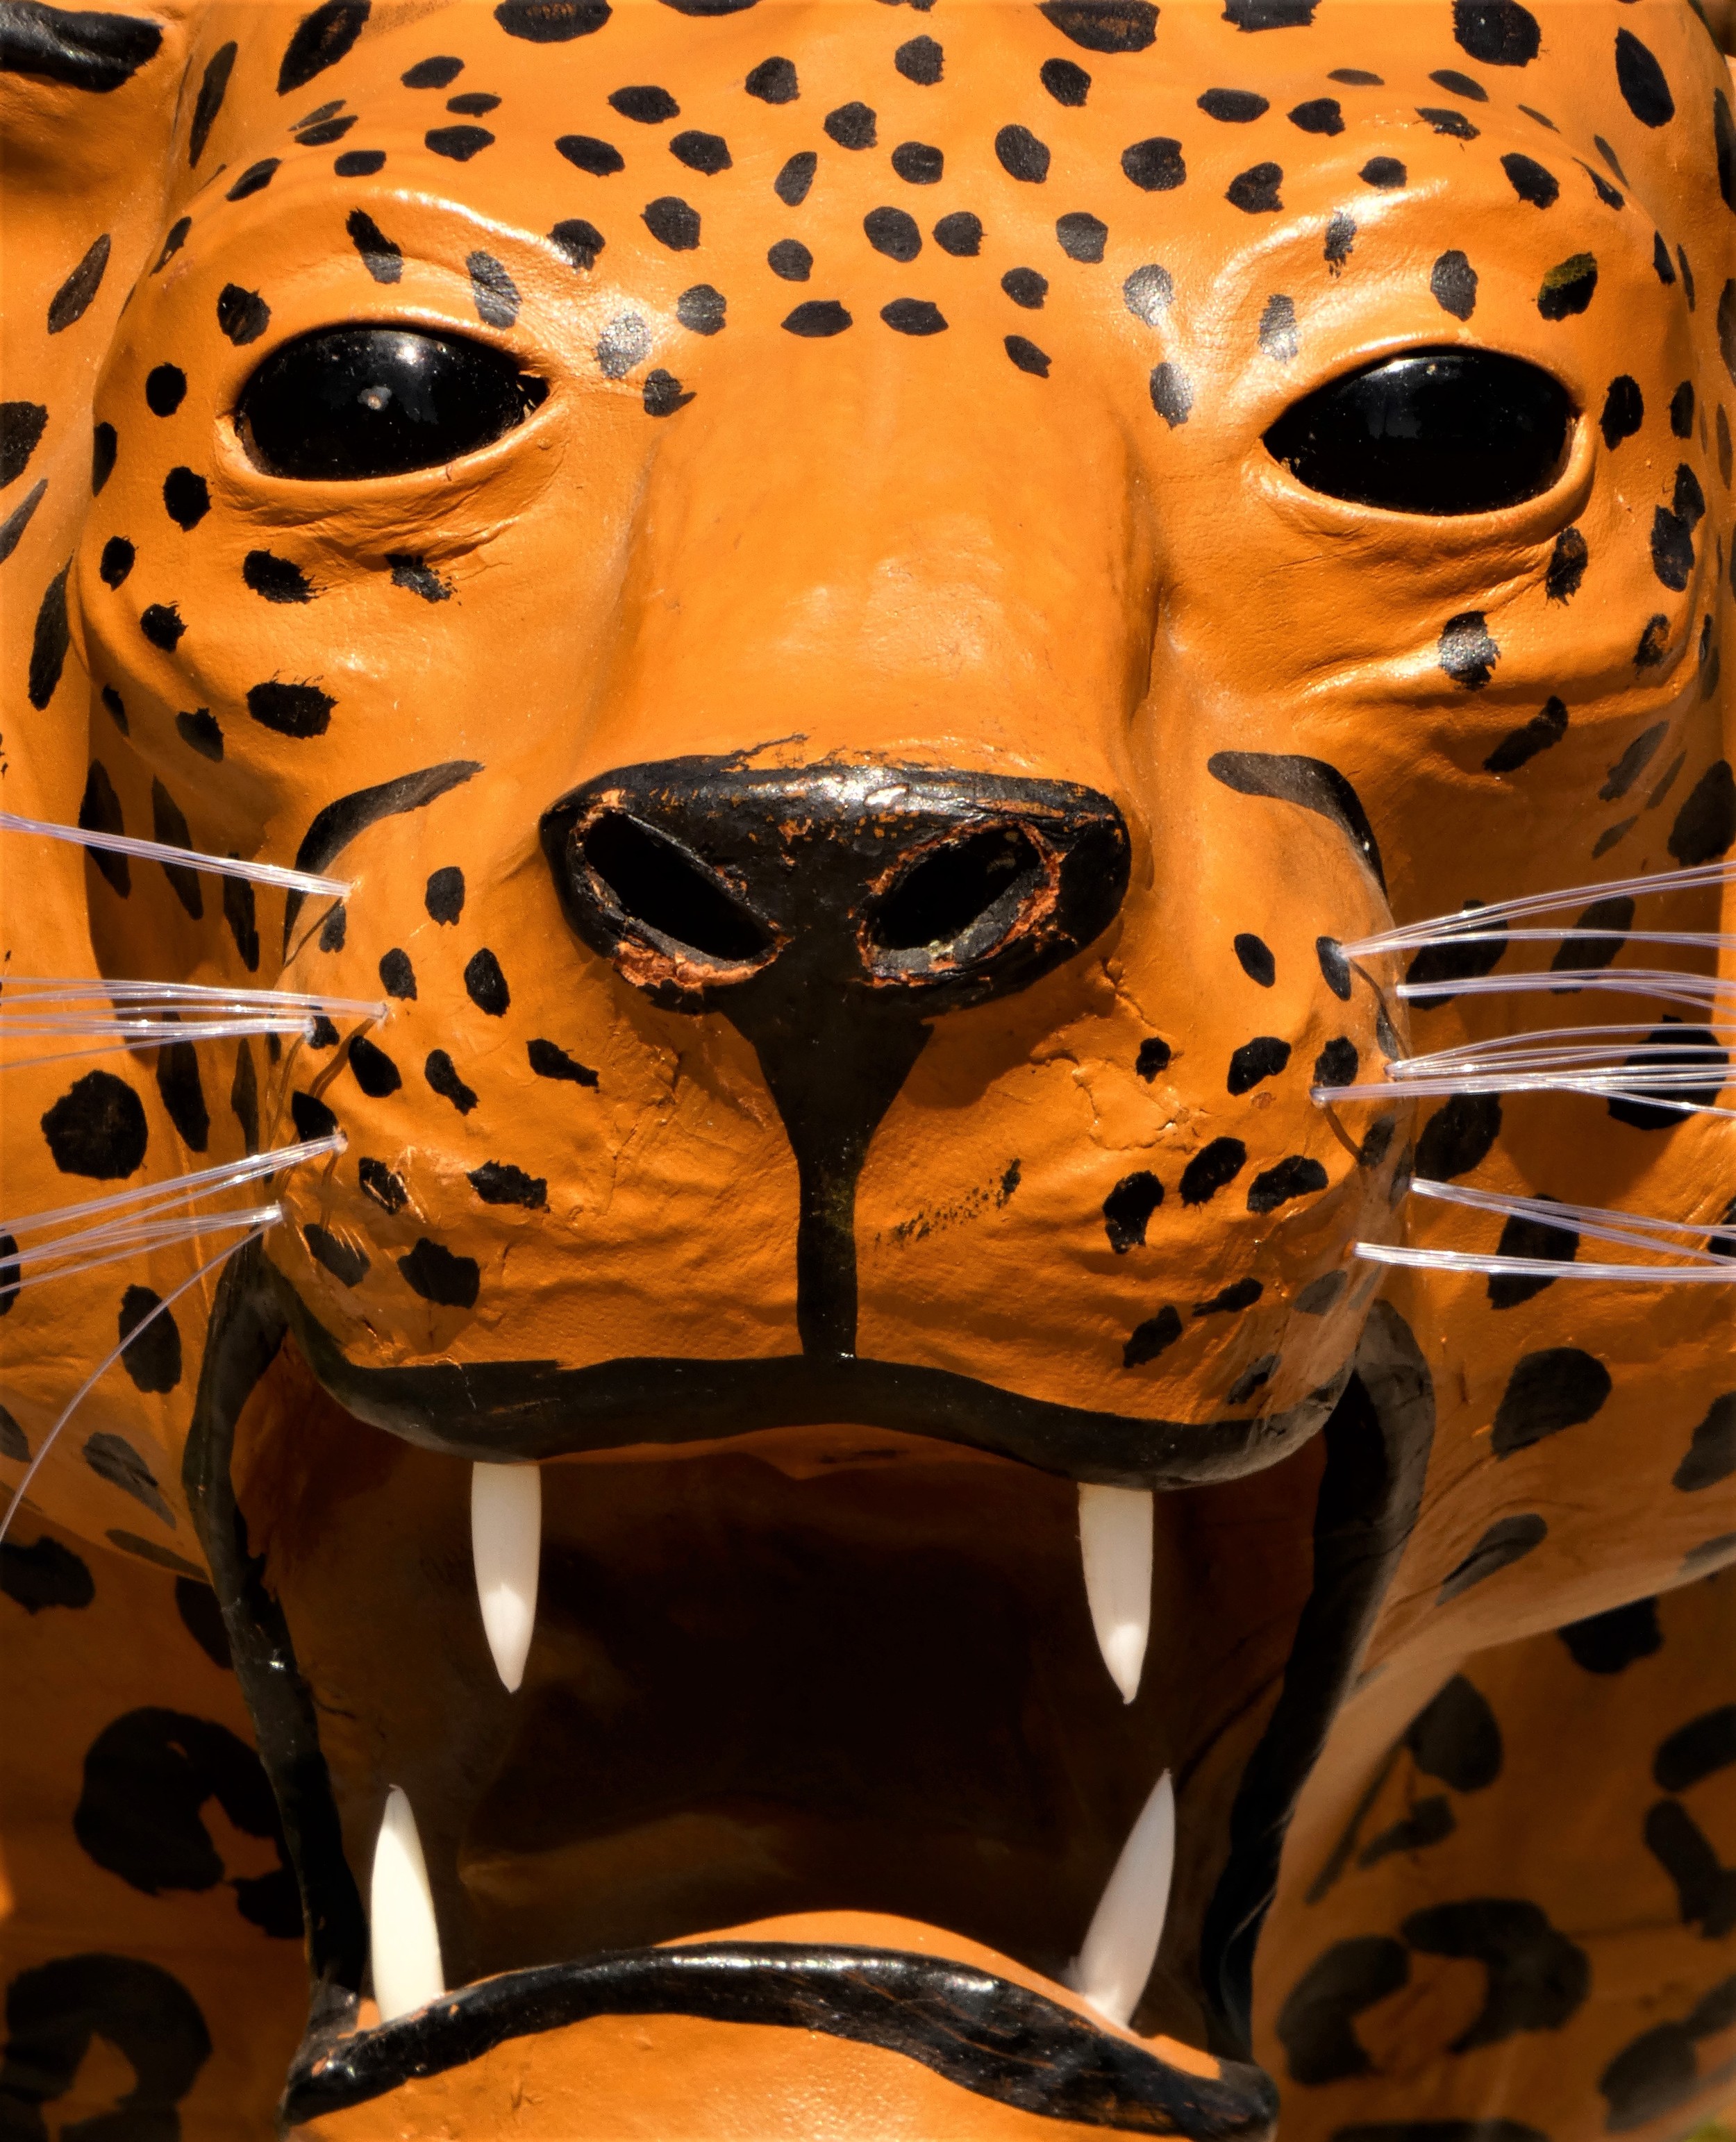 A paper mache sculpture, in the form of a leopard, plastic teeth and whiskers, 100cm x 70cm x 30cm - Image 6 of 6